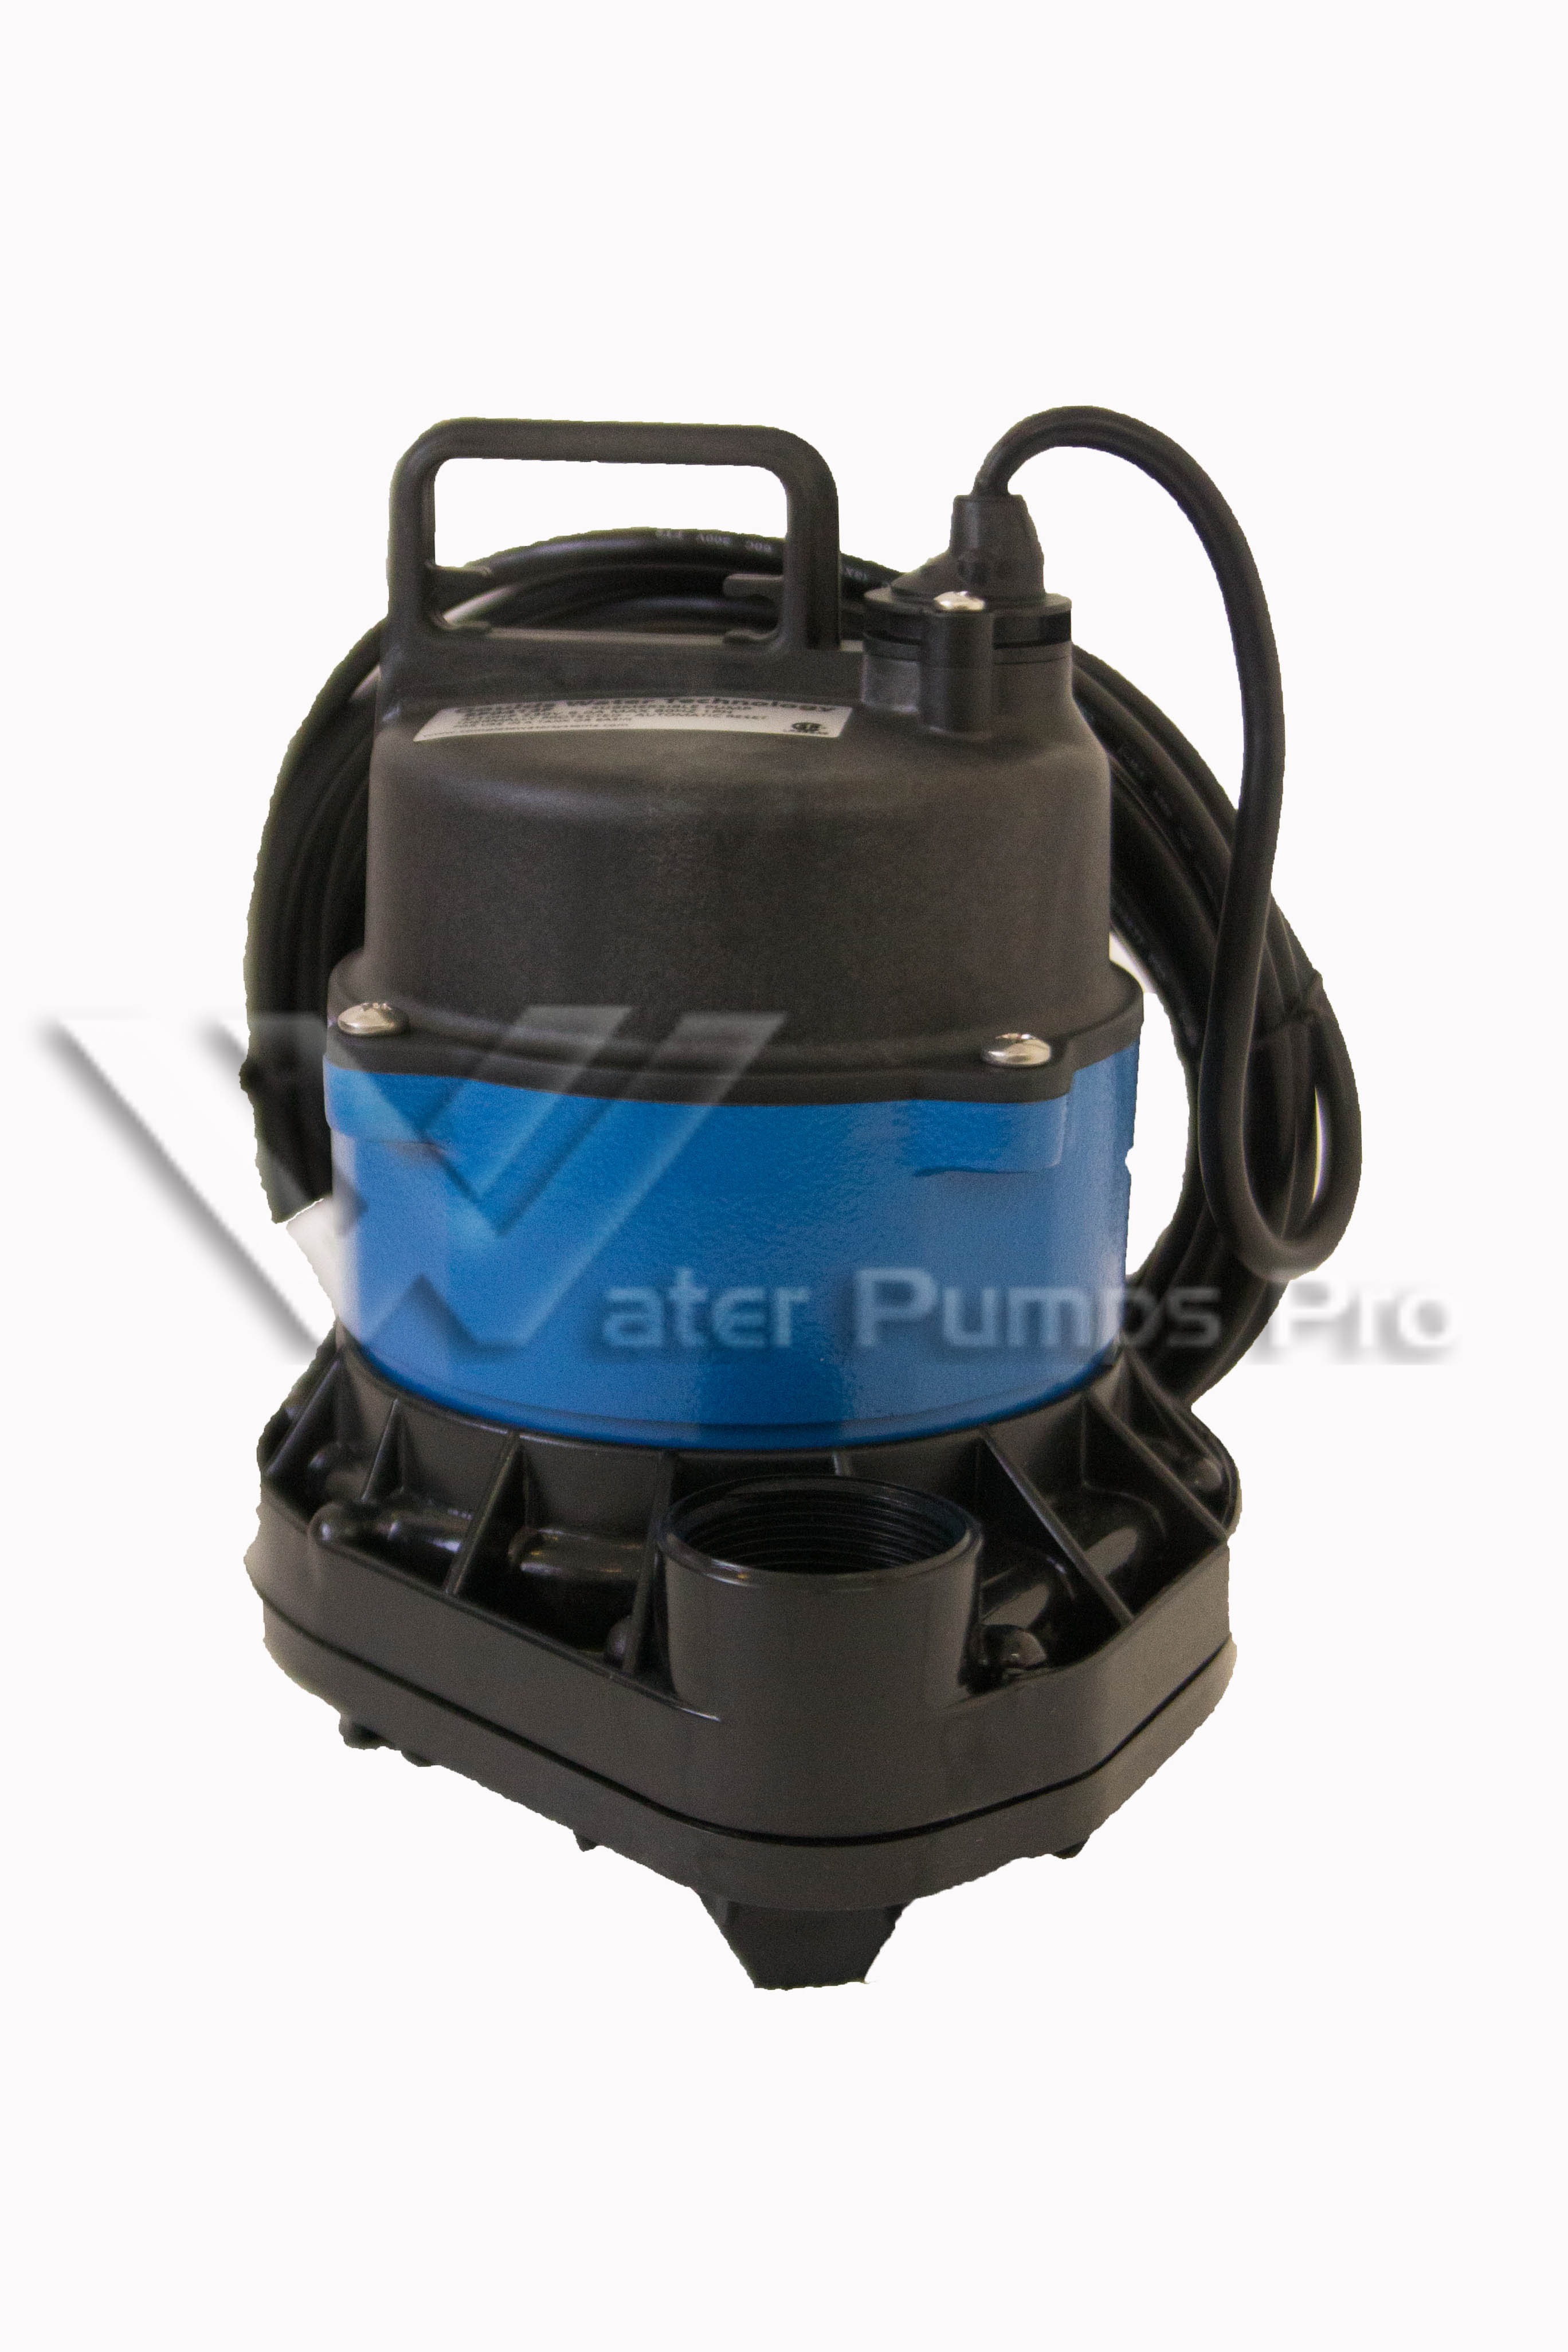 Goulds EP0412 4/10HP 230V Submersible Effluent Pump - Click Image to Close